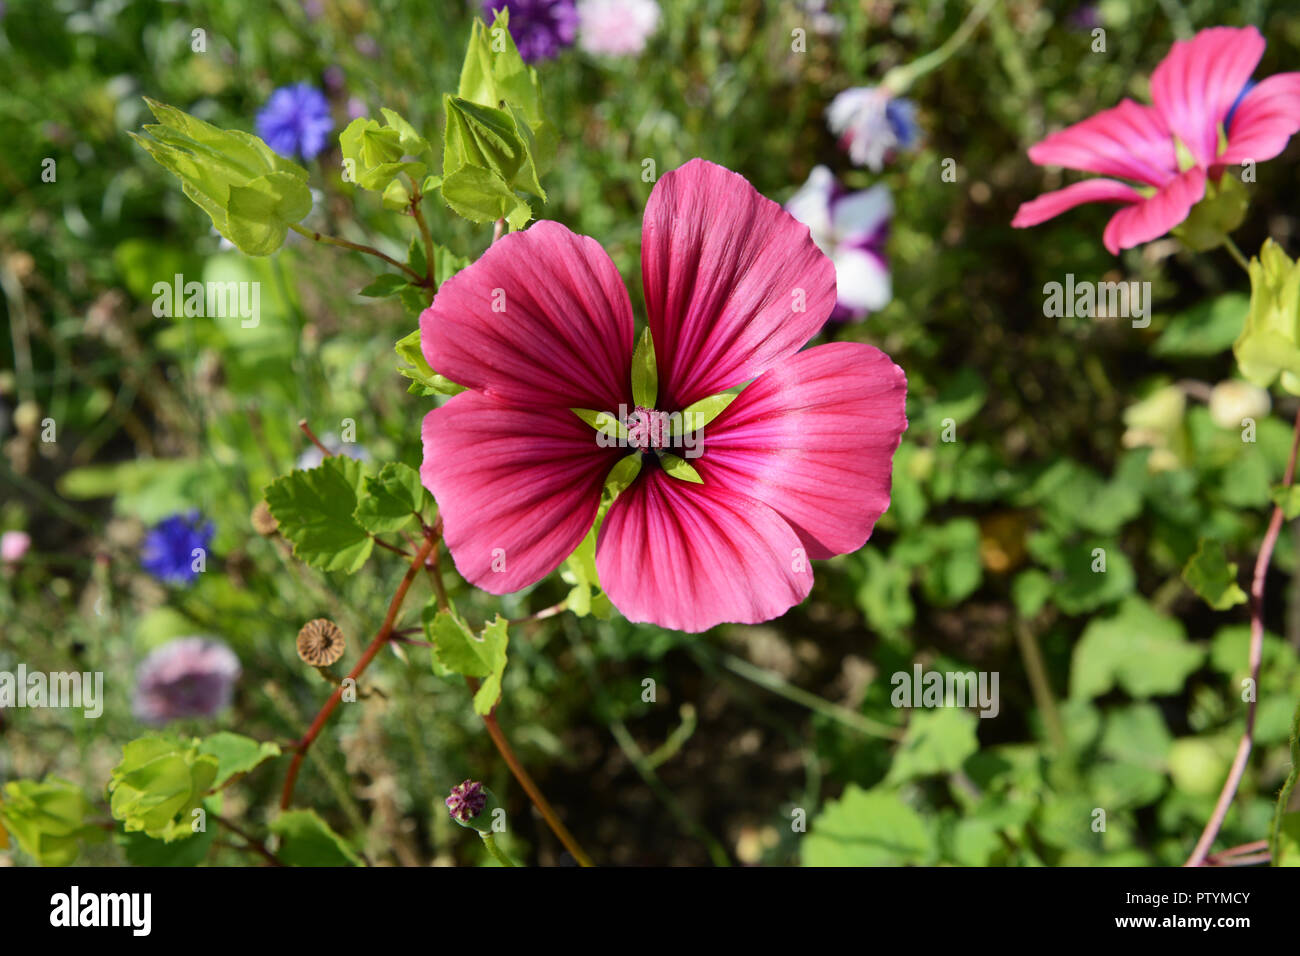 Malope flower - mallow wort - with five deep pink petals against flower bed background Stock Photo